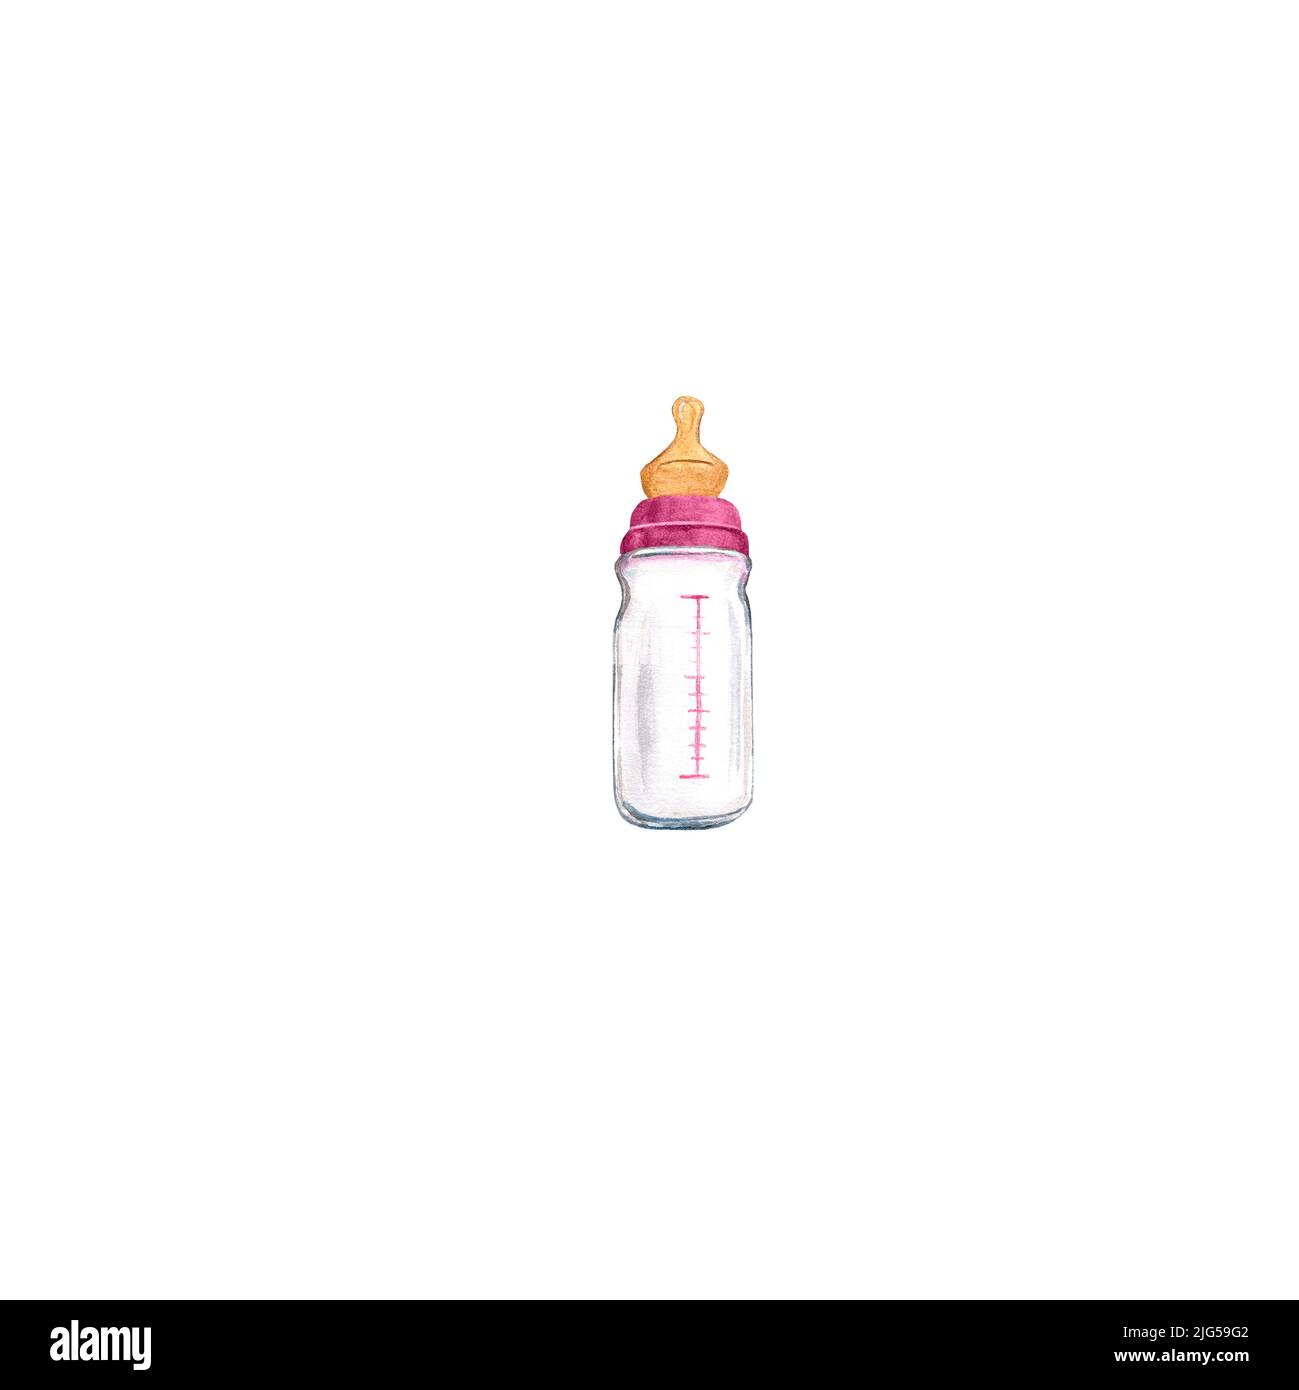 https://c8.alamy.com/comp/2JG59G2/pink-baby-milk-bottle-for-girl-art-watercolor-illustration-isolated-on-white-background-for-printing-postcards-invitations-newborn-products-2JG59G2.jpg